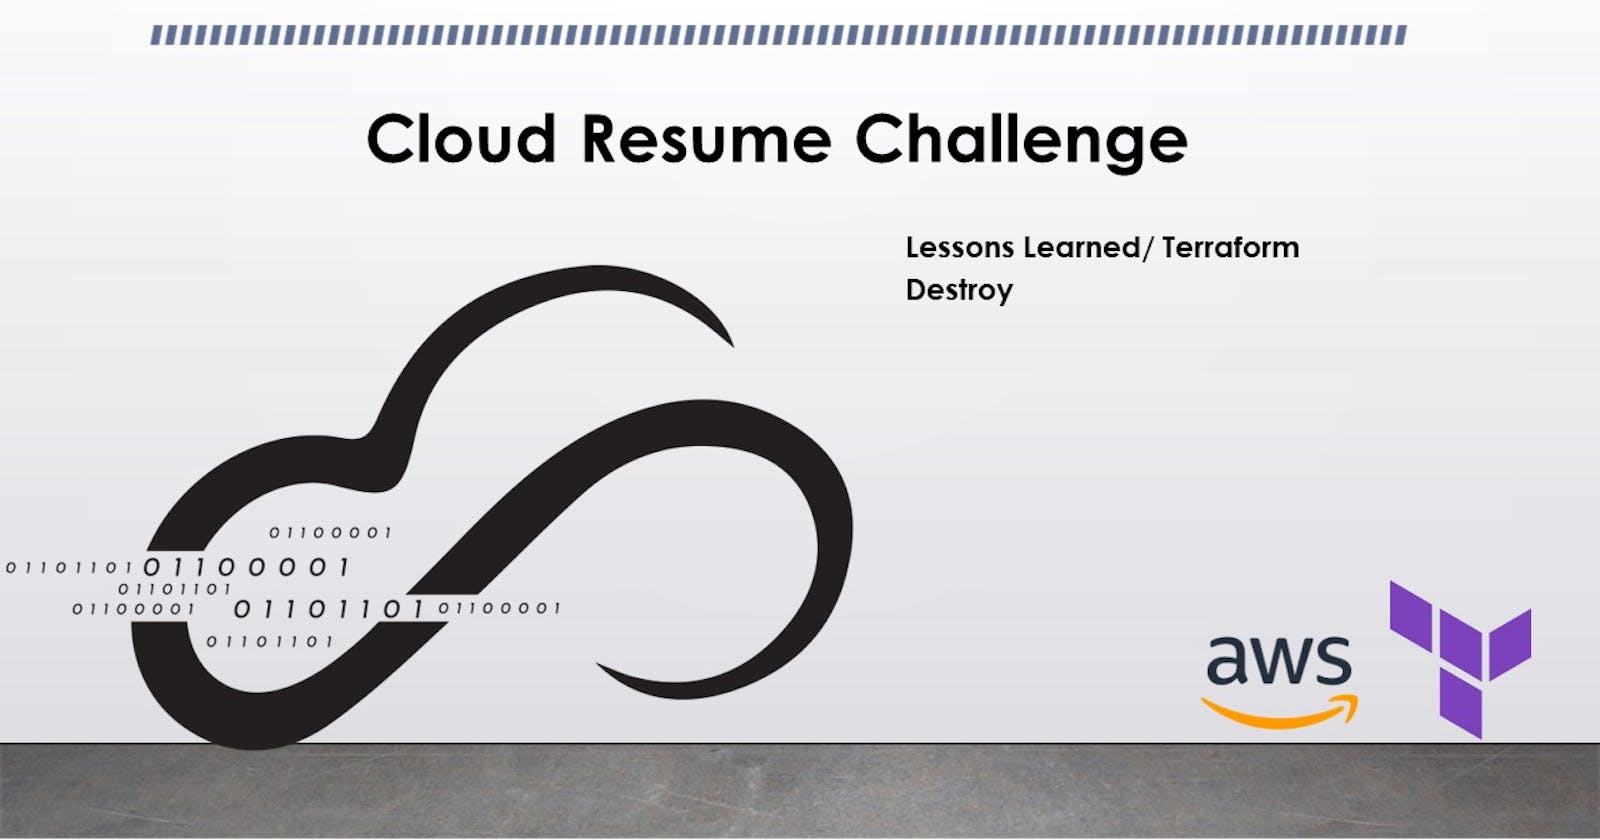 12. Cloud Resume Challenge: Lessons Learned/ Clean Up